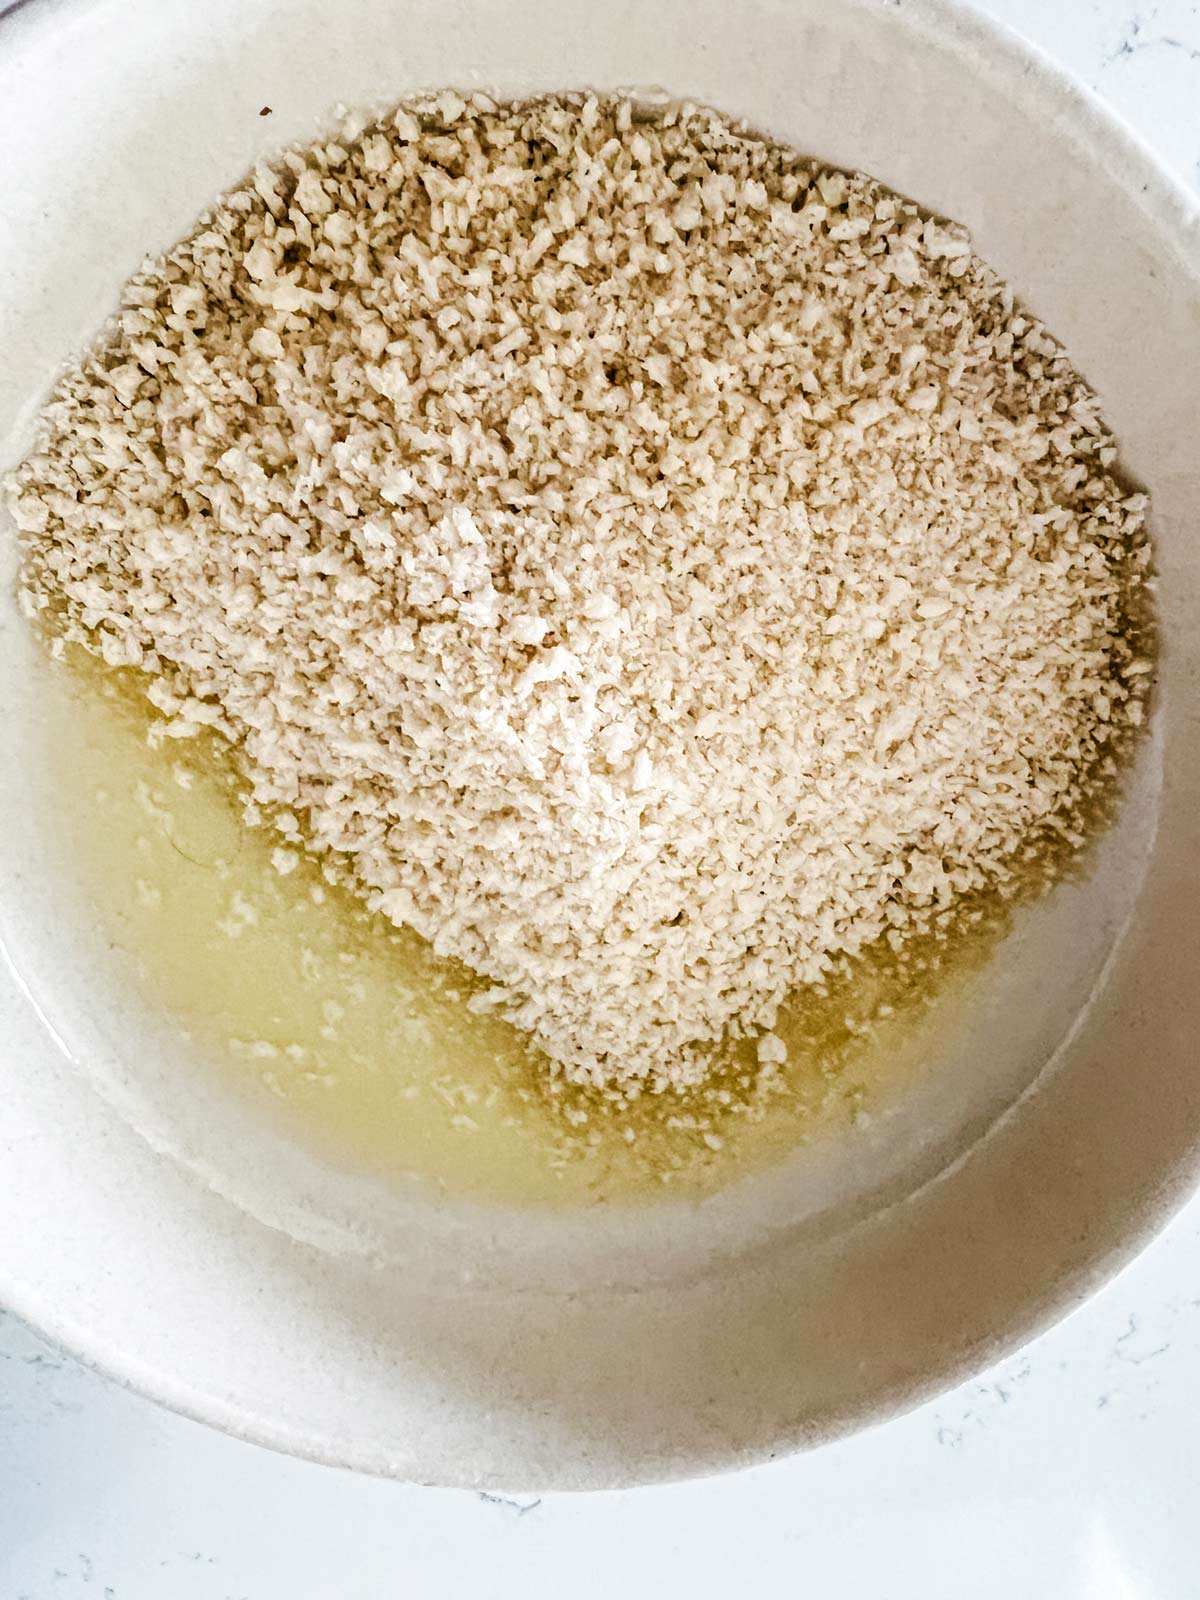 Melted butter and breadcrumbs in a small bowl.